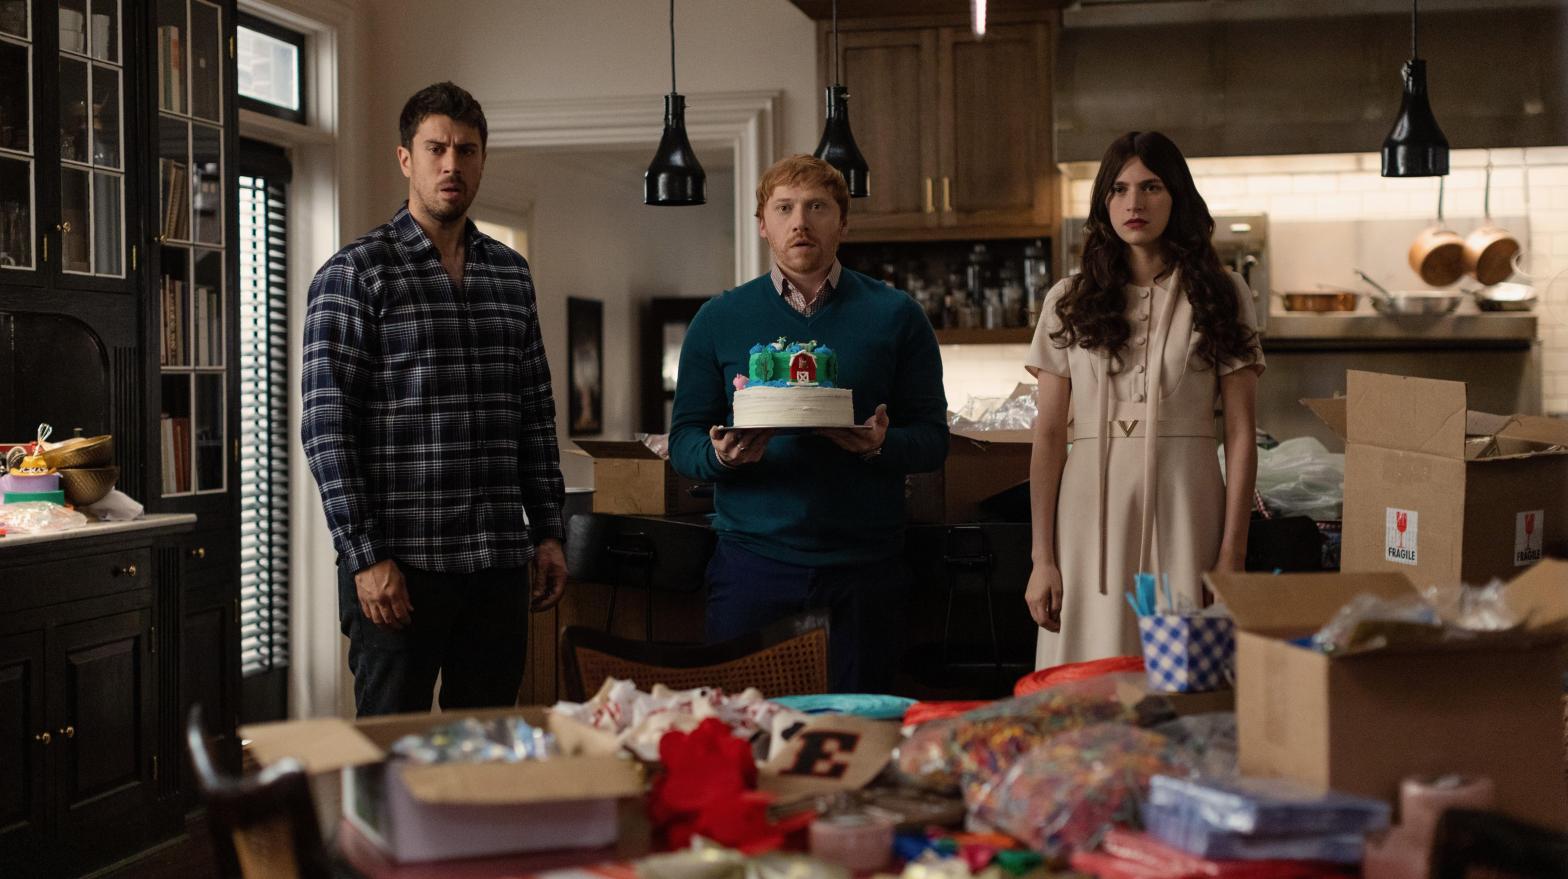 Toby Kebbell, Rupert Grint, and Nell Tiger Free in season four of Servant. (Image: Apple TV+)